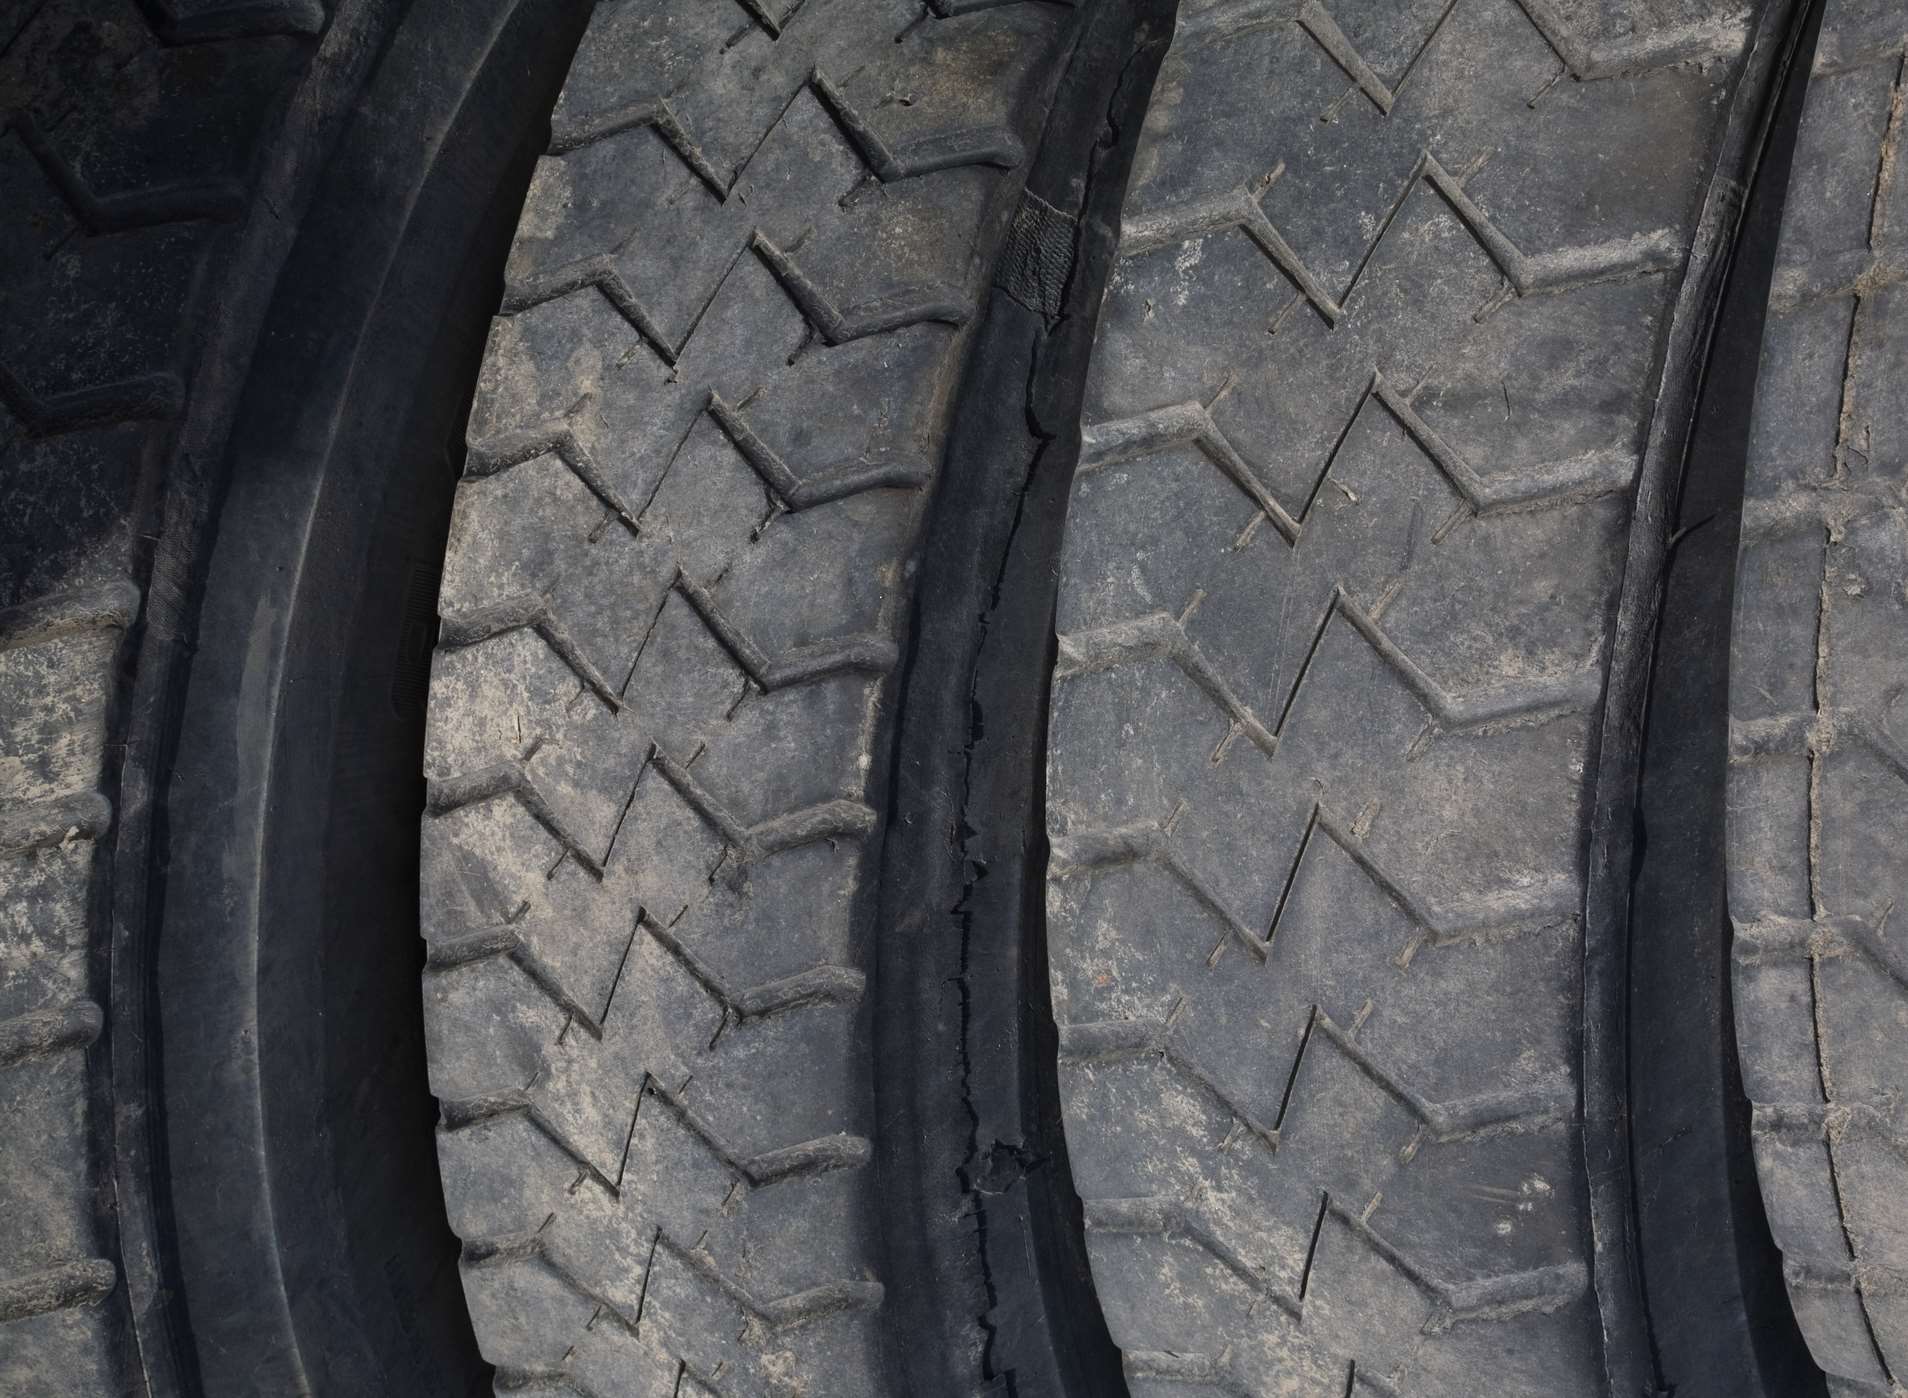 The migrants were found hiding in tyres in the back of the van. Stock image.